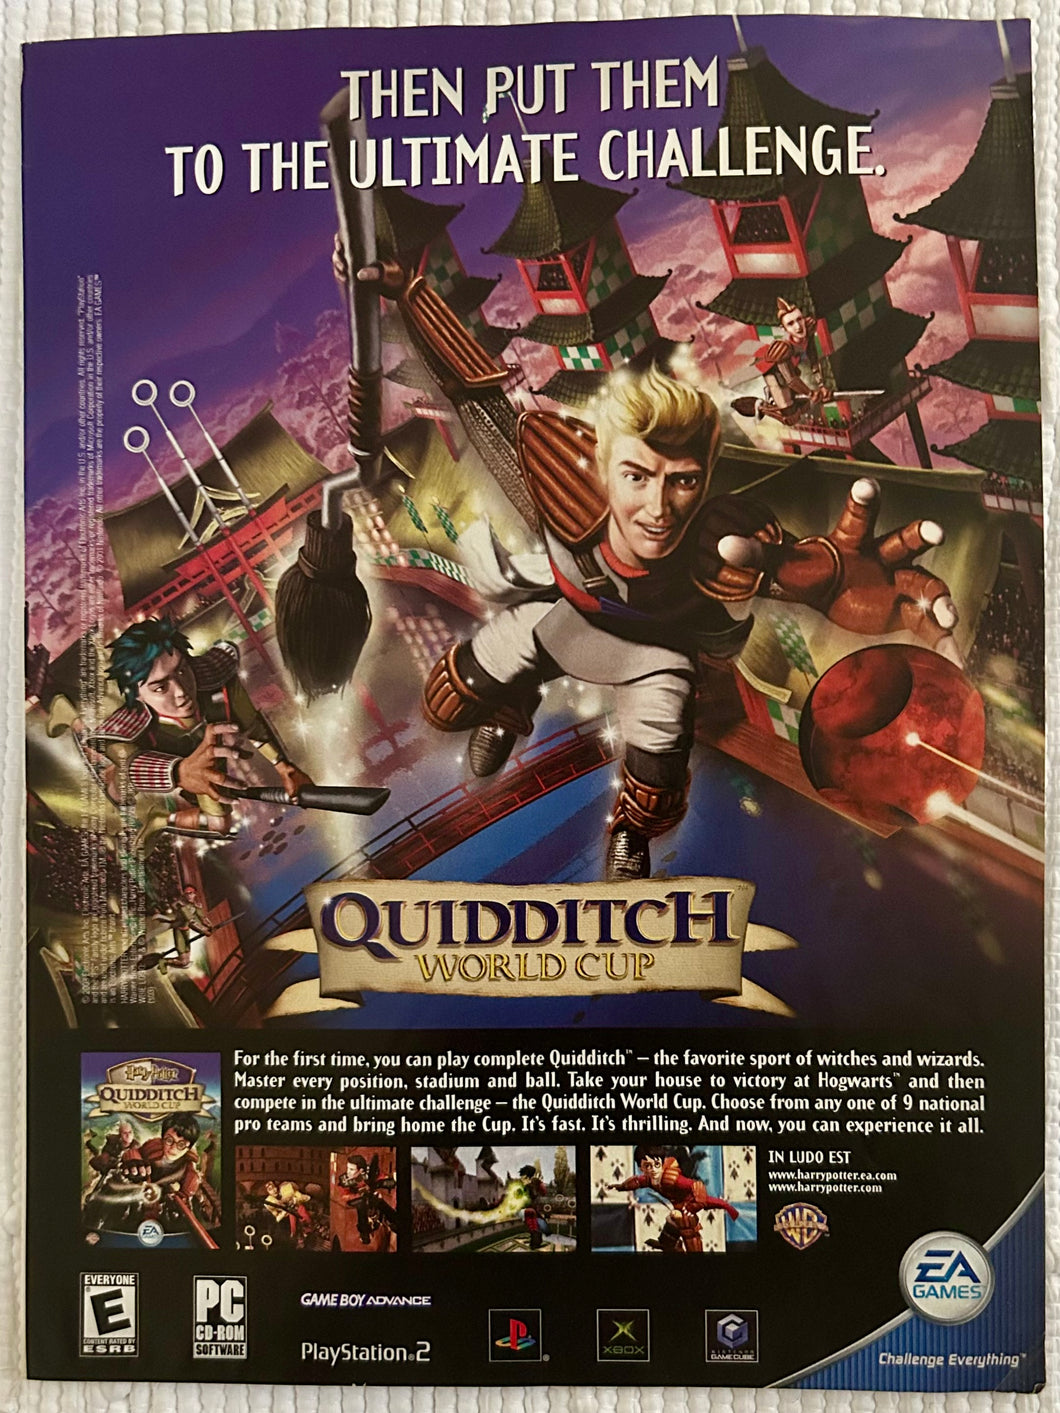 Harry Potter: Quidditch World Cup - PS2 NGC Xbox GBA PC - Original Vintage Advertisement - Print Ads - Laminated A4 Poster